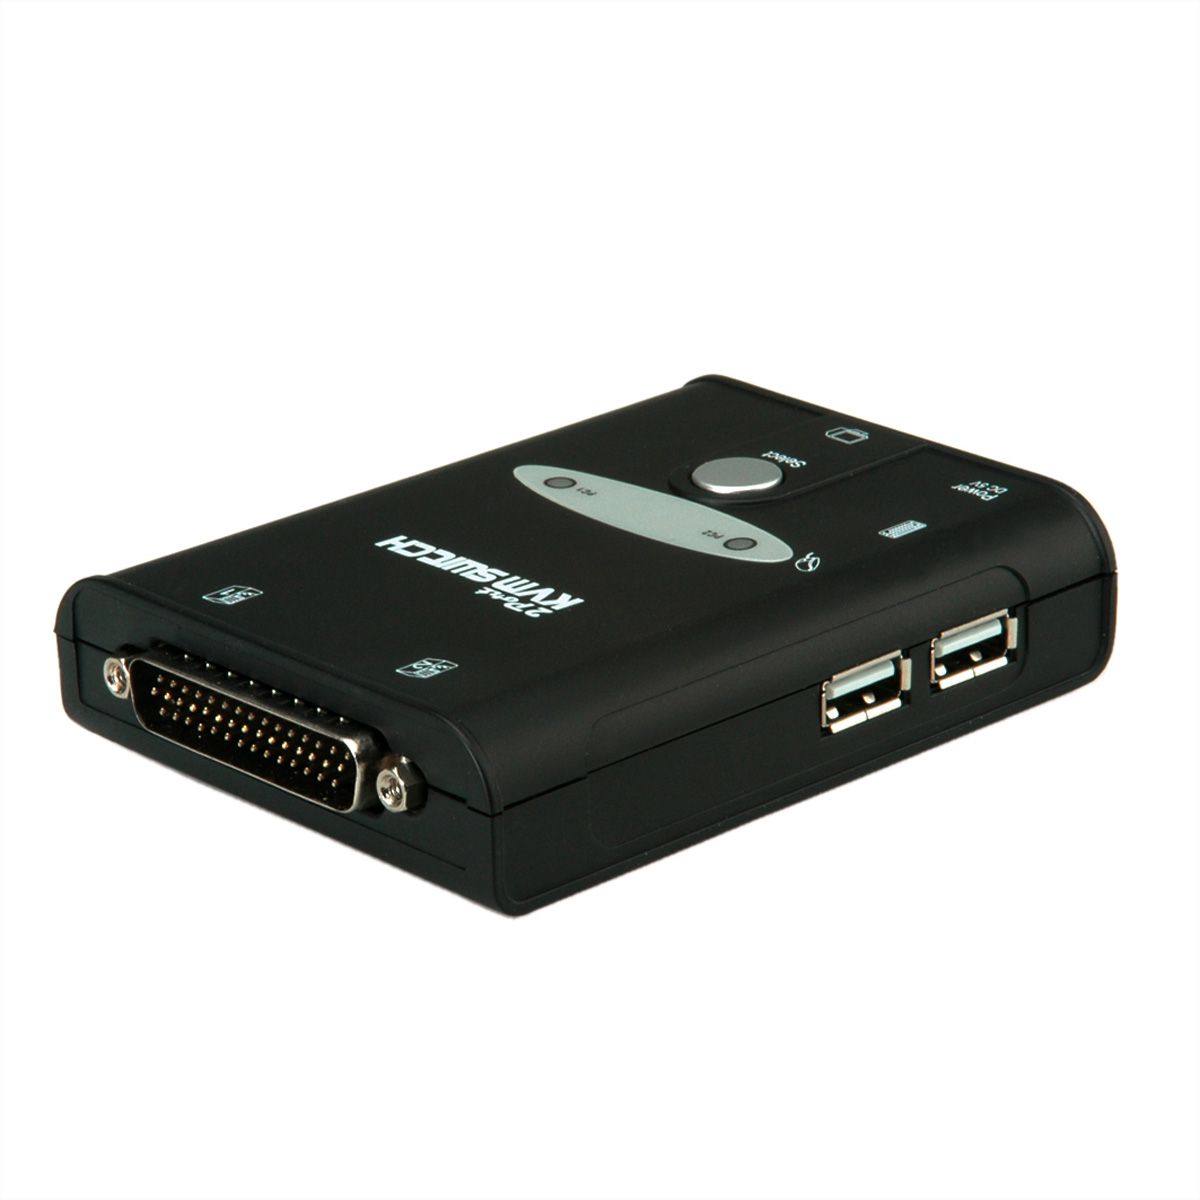 best kvm switch for two computers